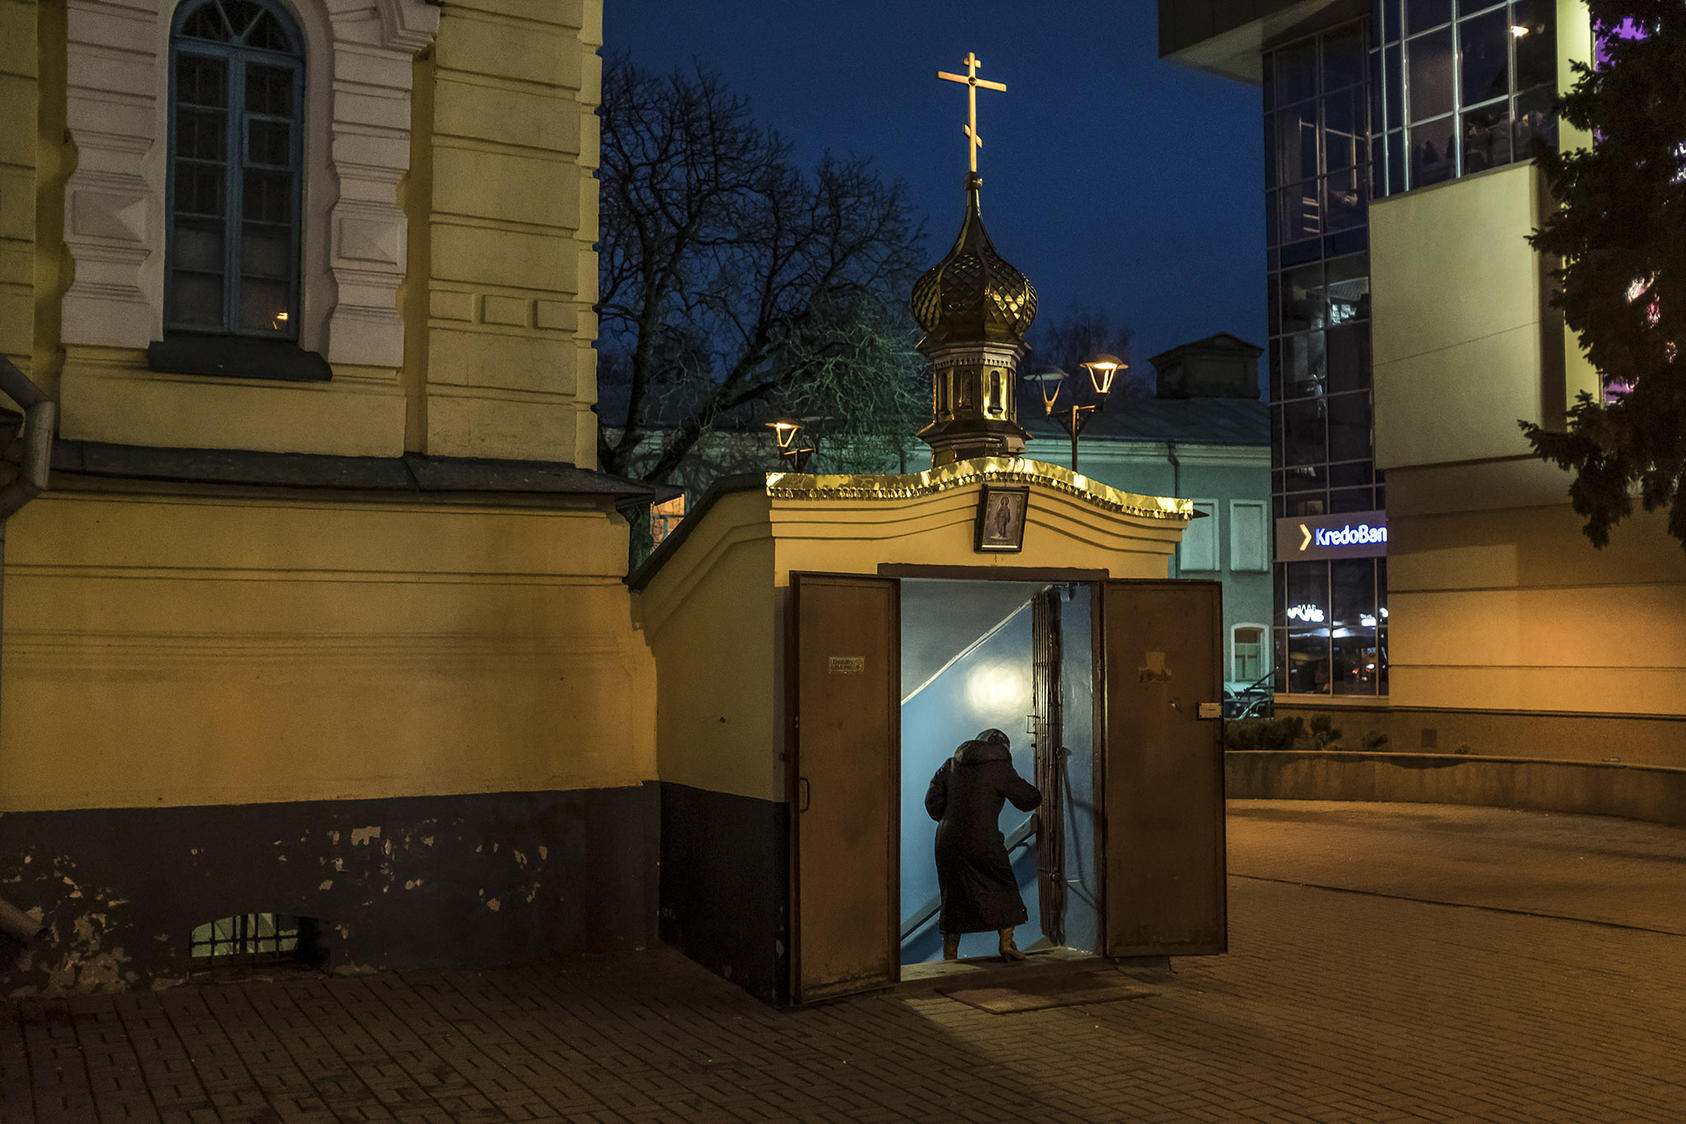 A worshiper enters the basement of the Church of the Archangel Michael in Rivne, Ukraine, where the Moscow-led Orthodox branch holds services. December 9, 2018. (Brendan Hoffman/The New York Times)